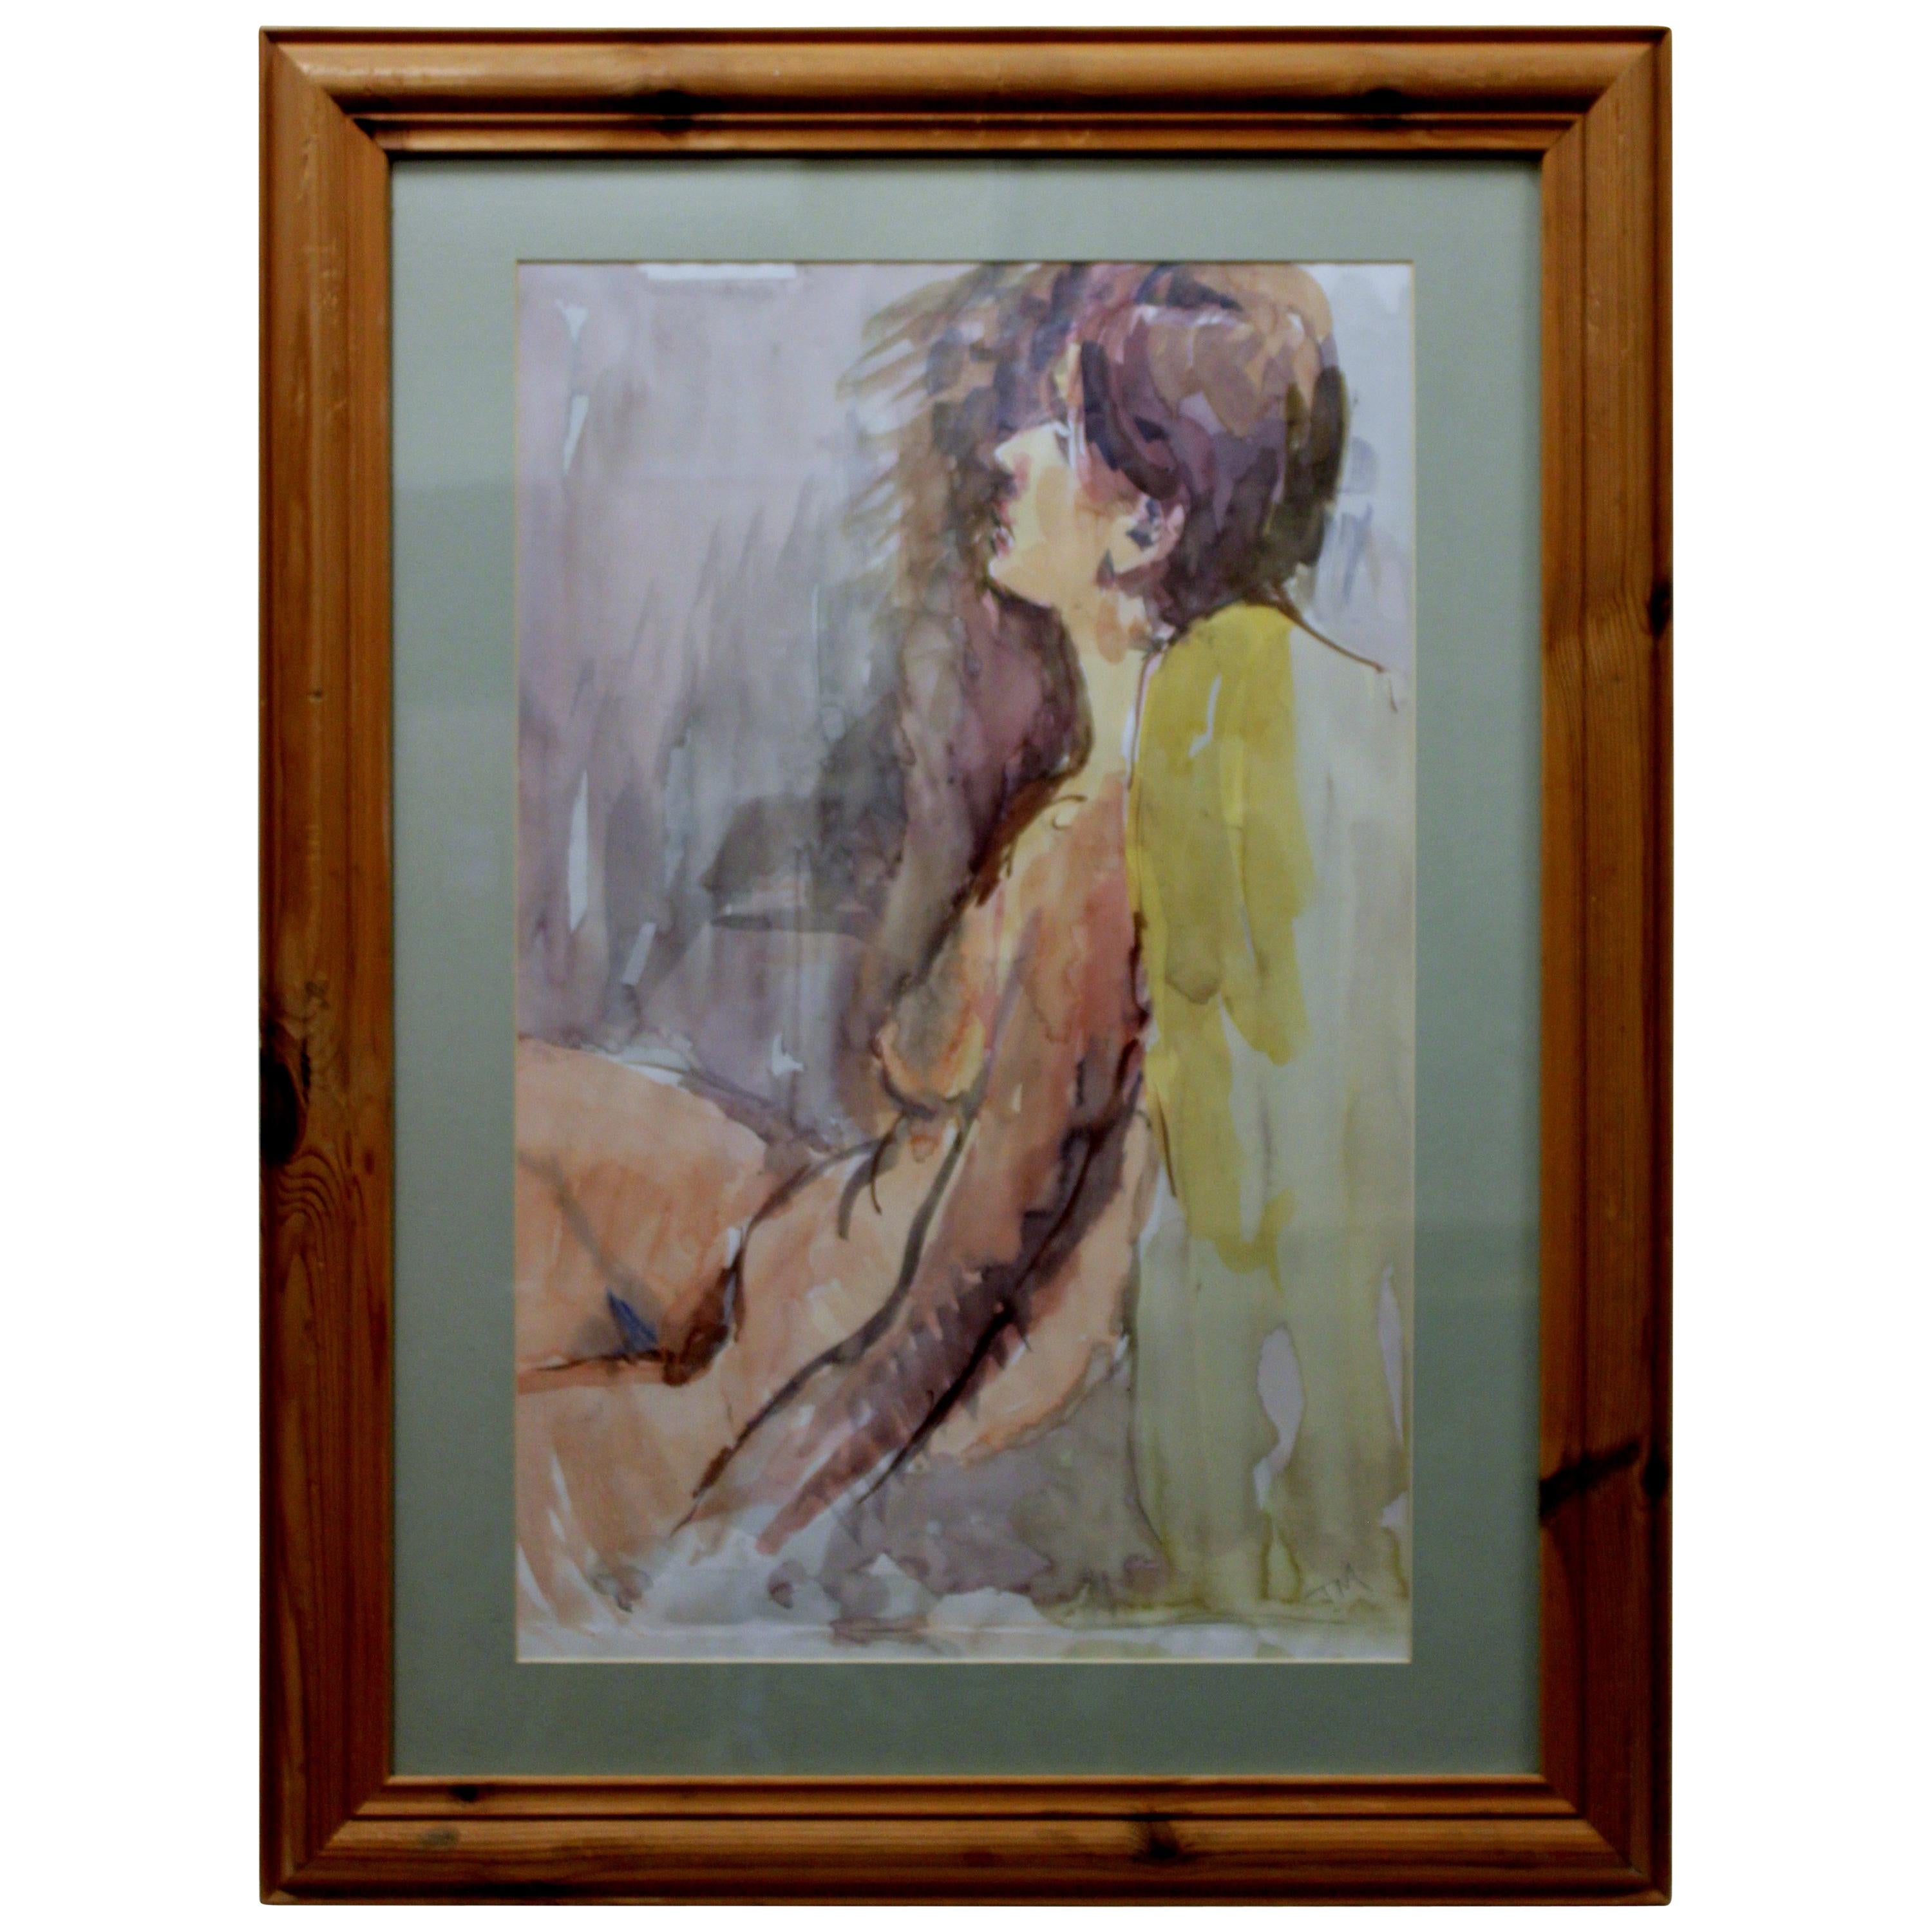 Vintage Watercolour Painting "Nude Woman"